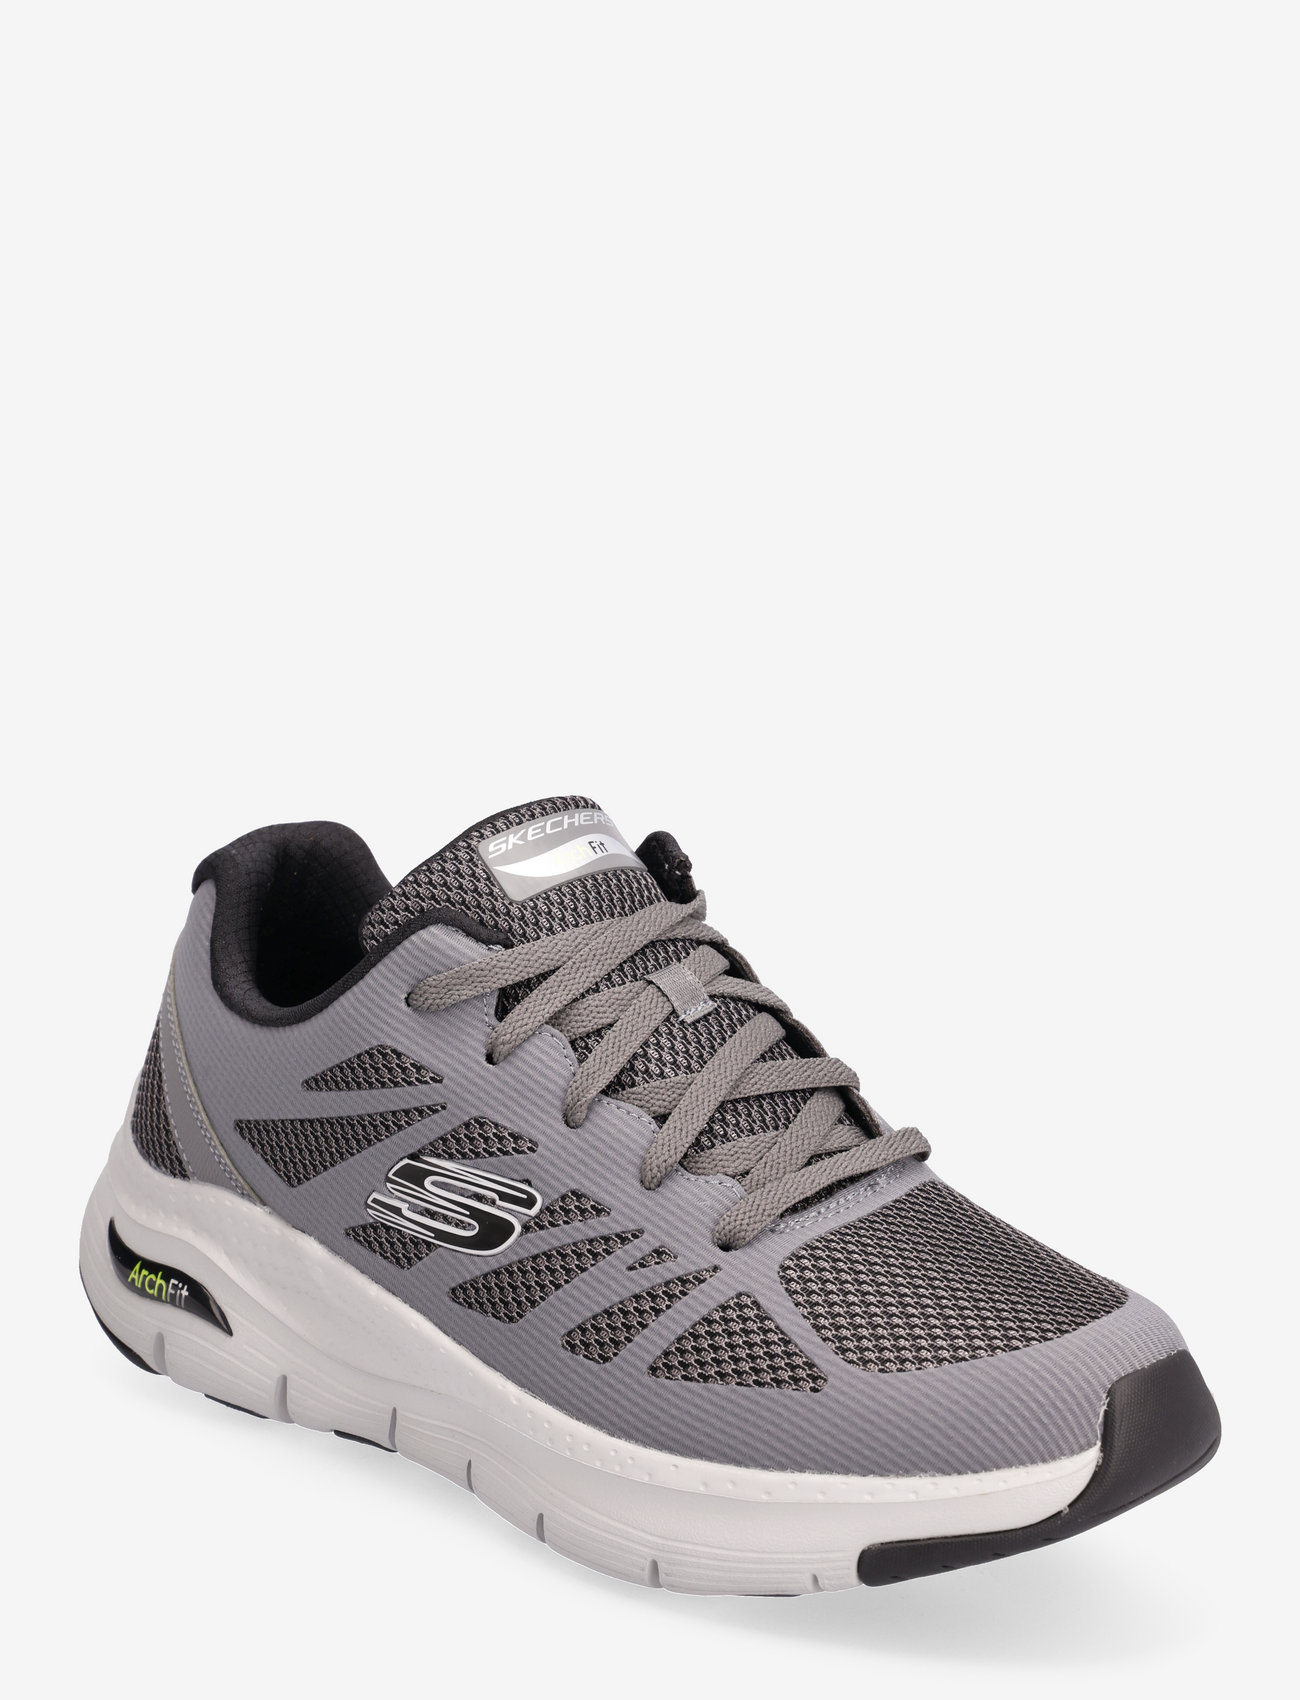 Skechers - Mens Arch Fit - Charge Back - lave sneakers - ccbk charcoal black - 0